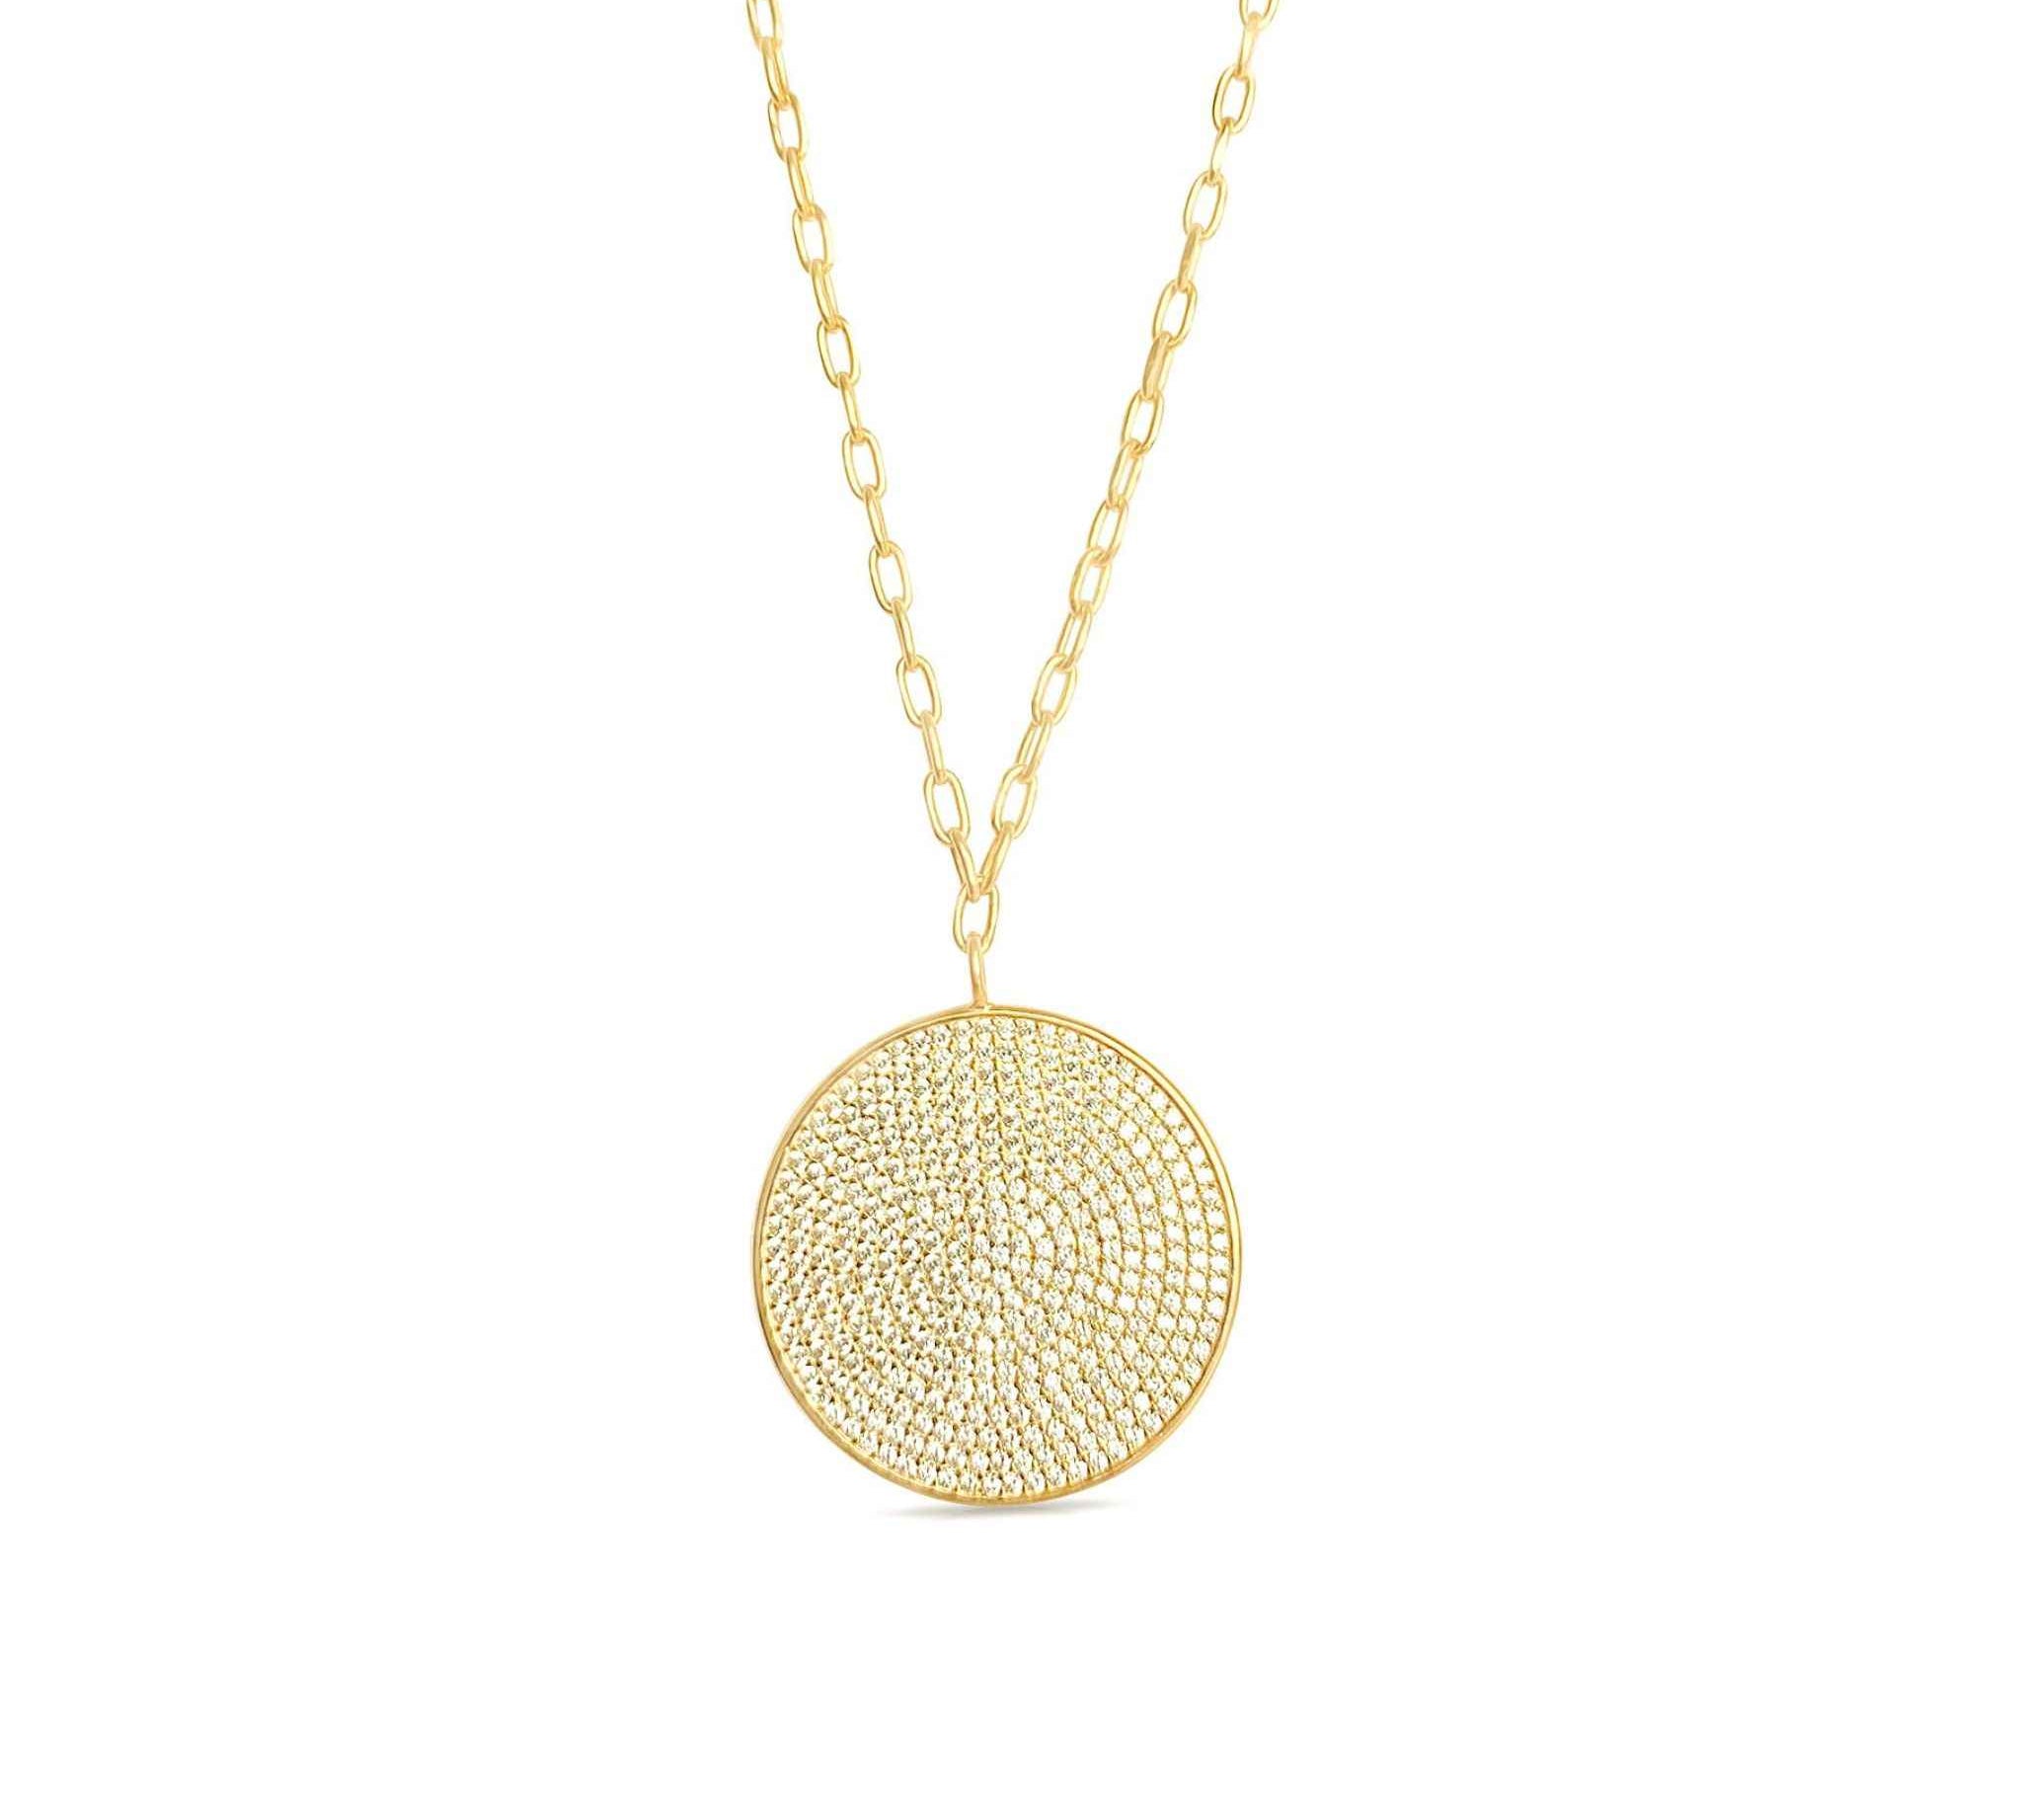 Chic 14K gold vermeil medallion necklace with clear diamonettes, perfect for making a statement.